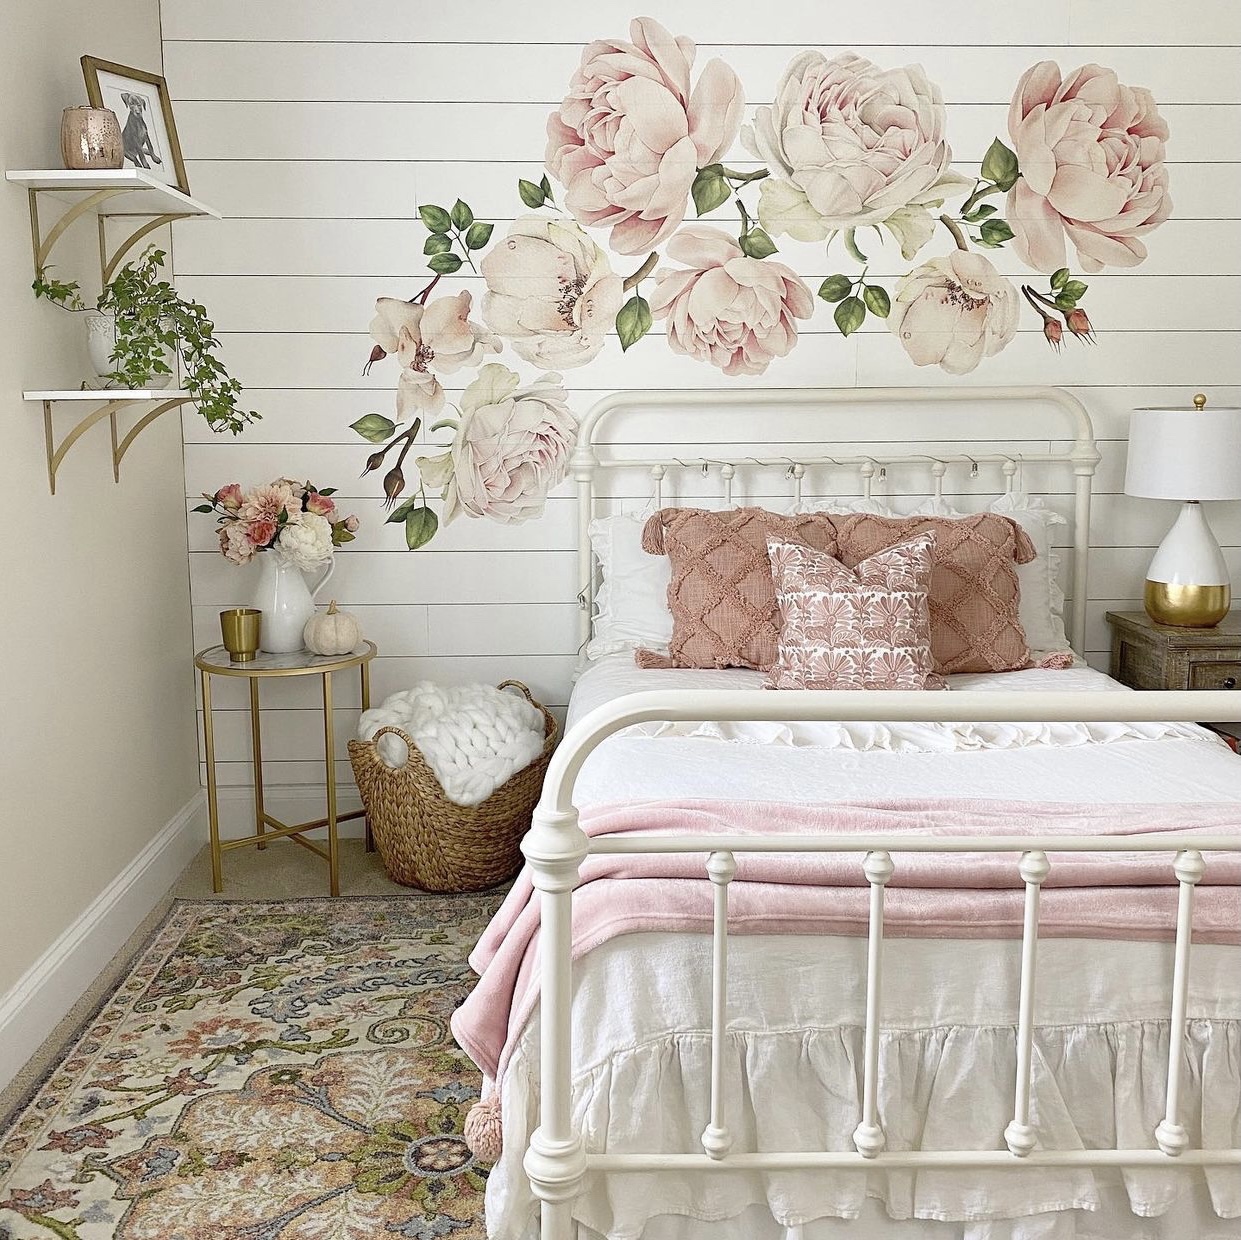 Girls bedroom with pink floral decals on white shiplap behind the white iron bed, open shelves on the opposite wall and a rug on the floor.